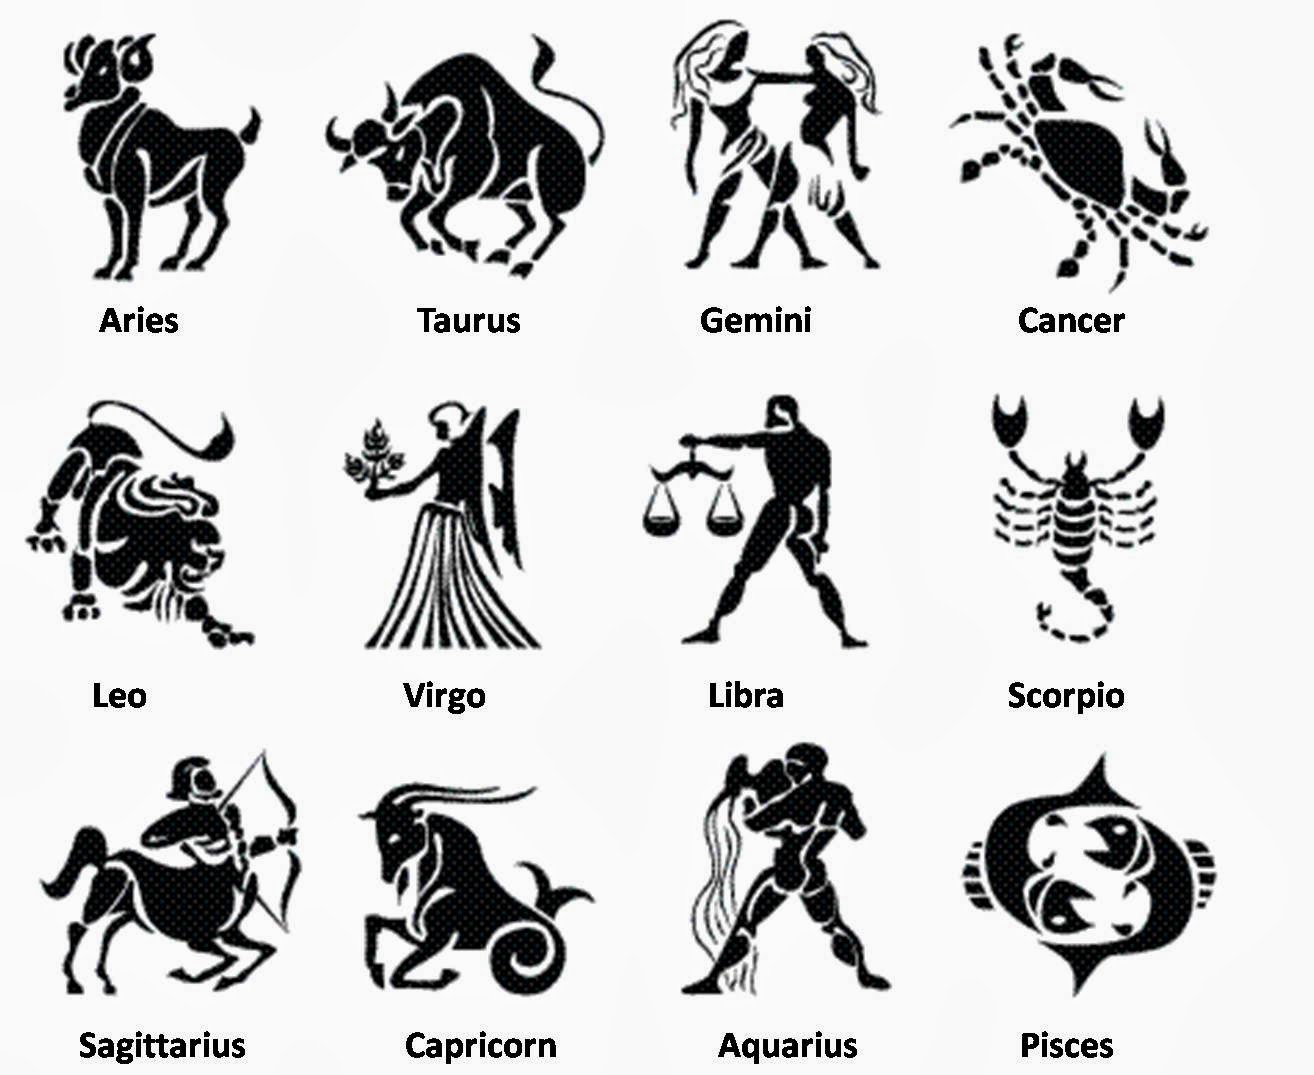 By Astrology And Zodiac Sign July 2009 You are most compatible with people ...